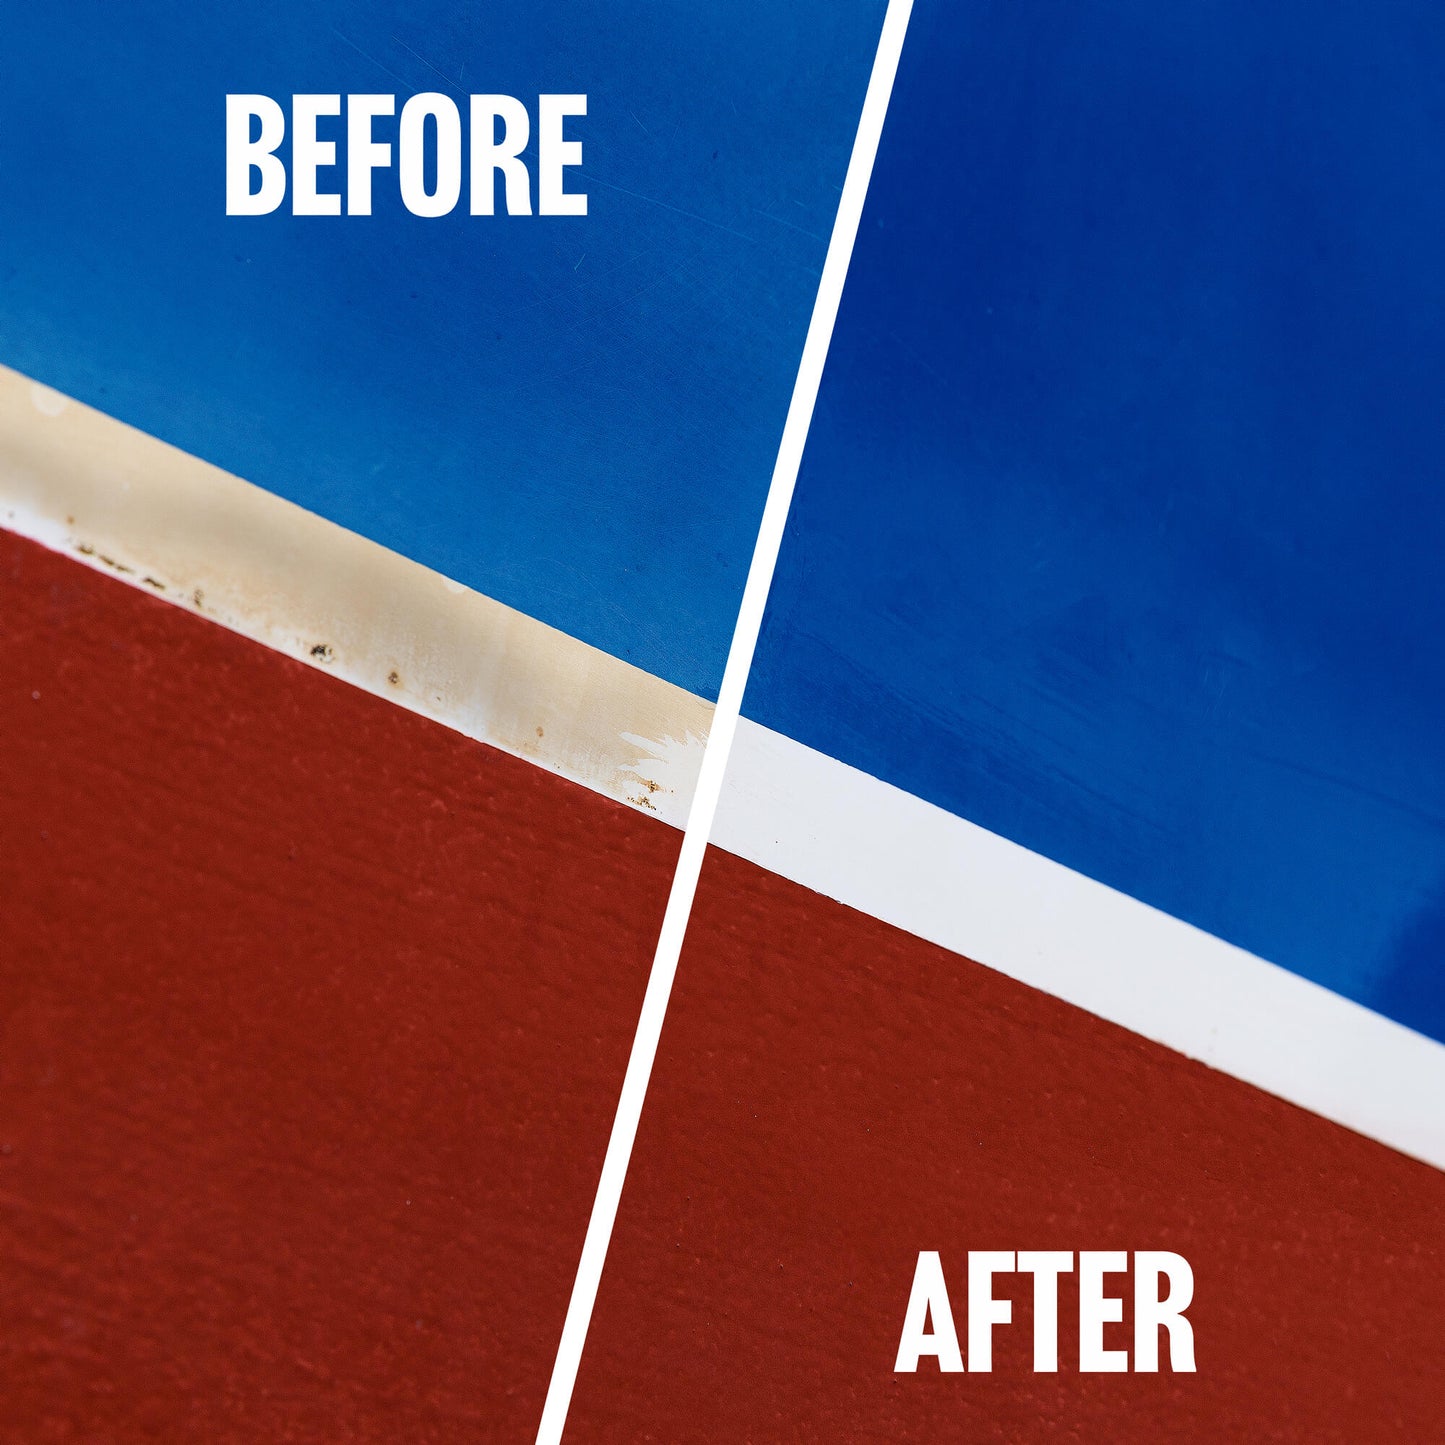 TotalBoat White Knight Fiberglass Stain Remover before and after